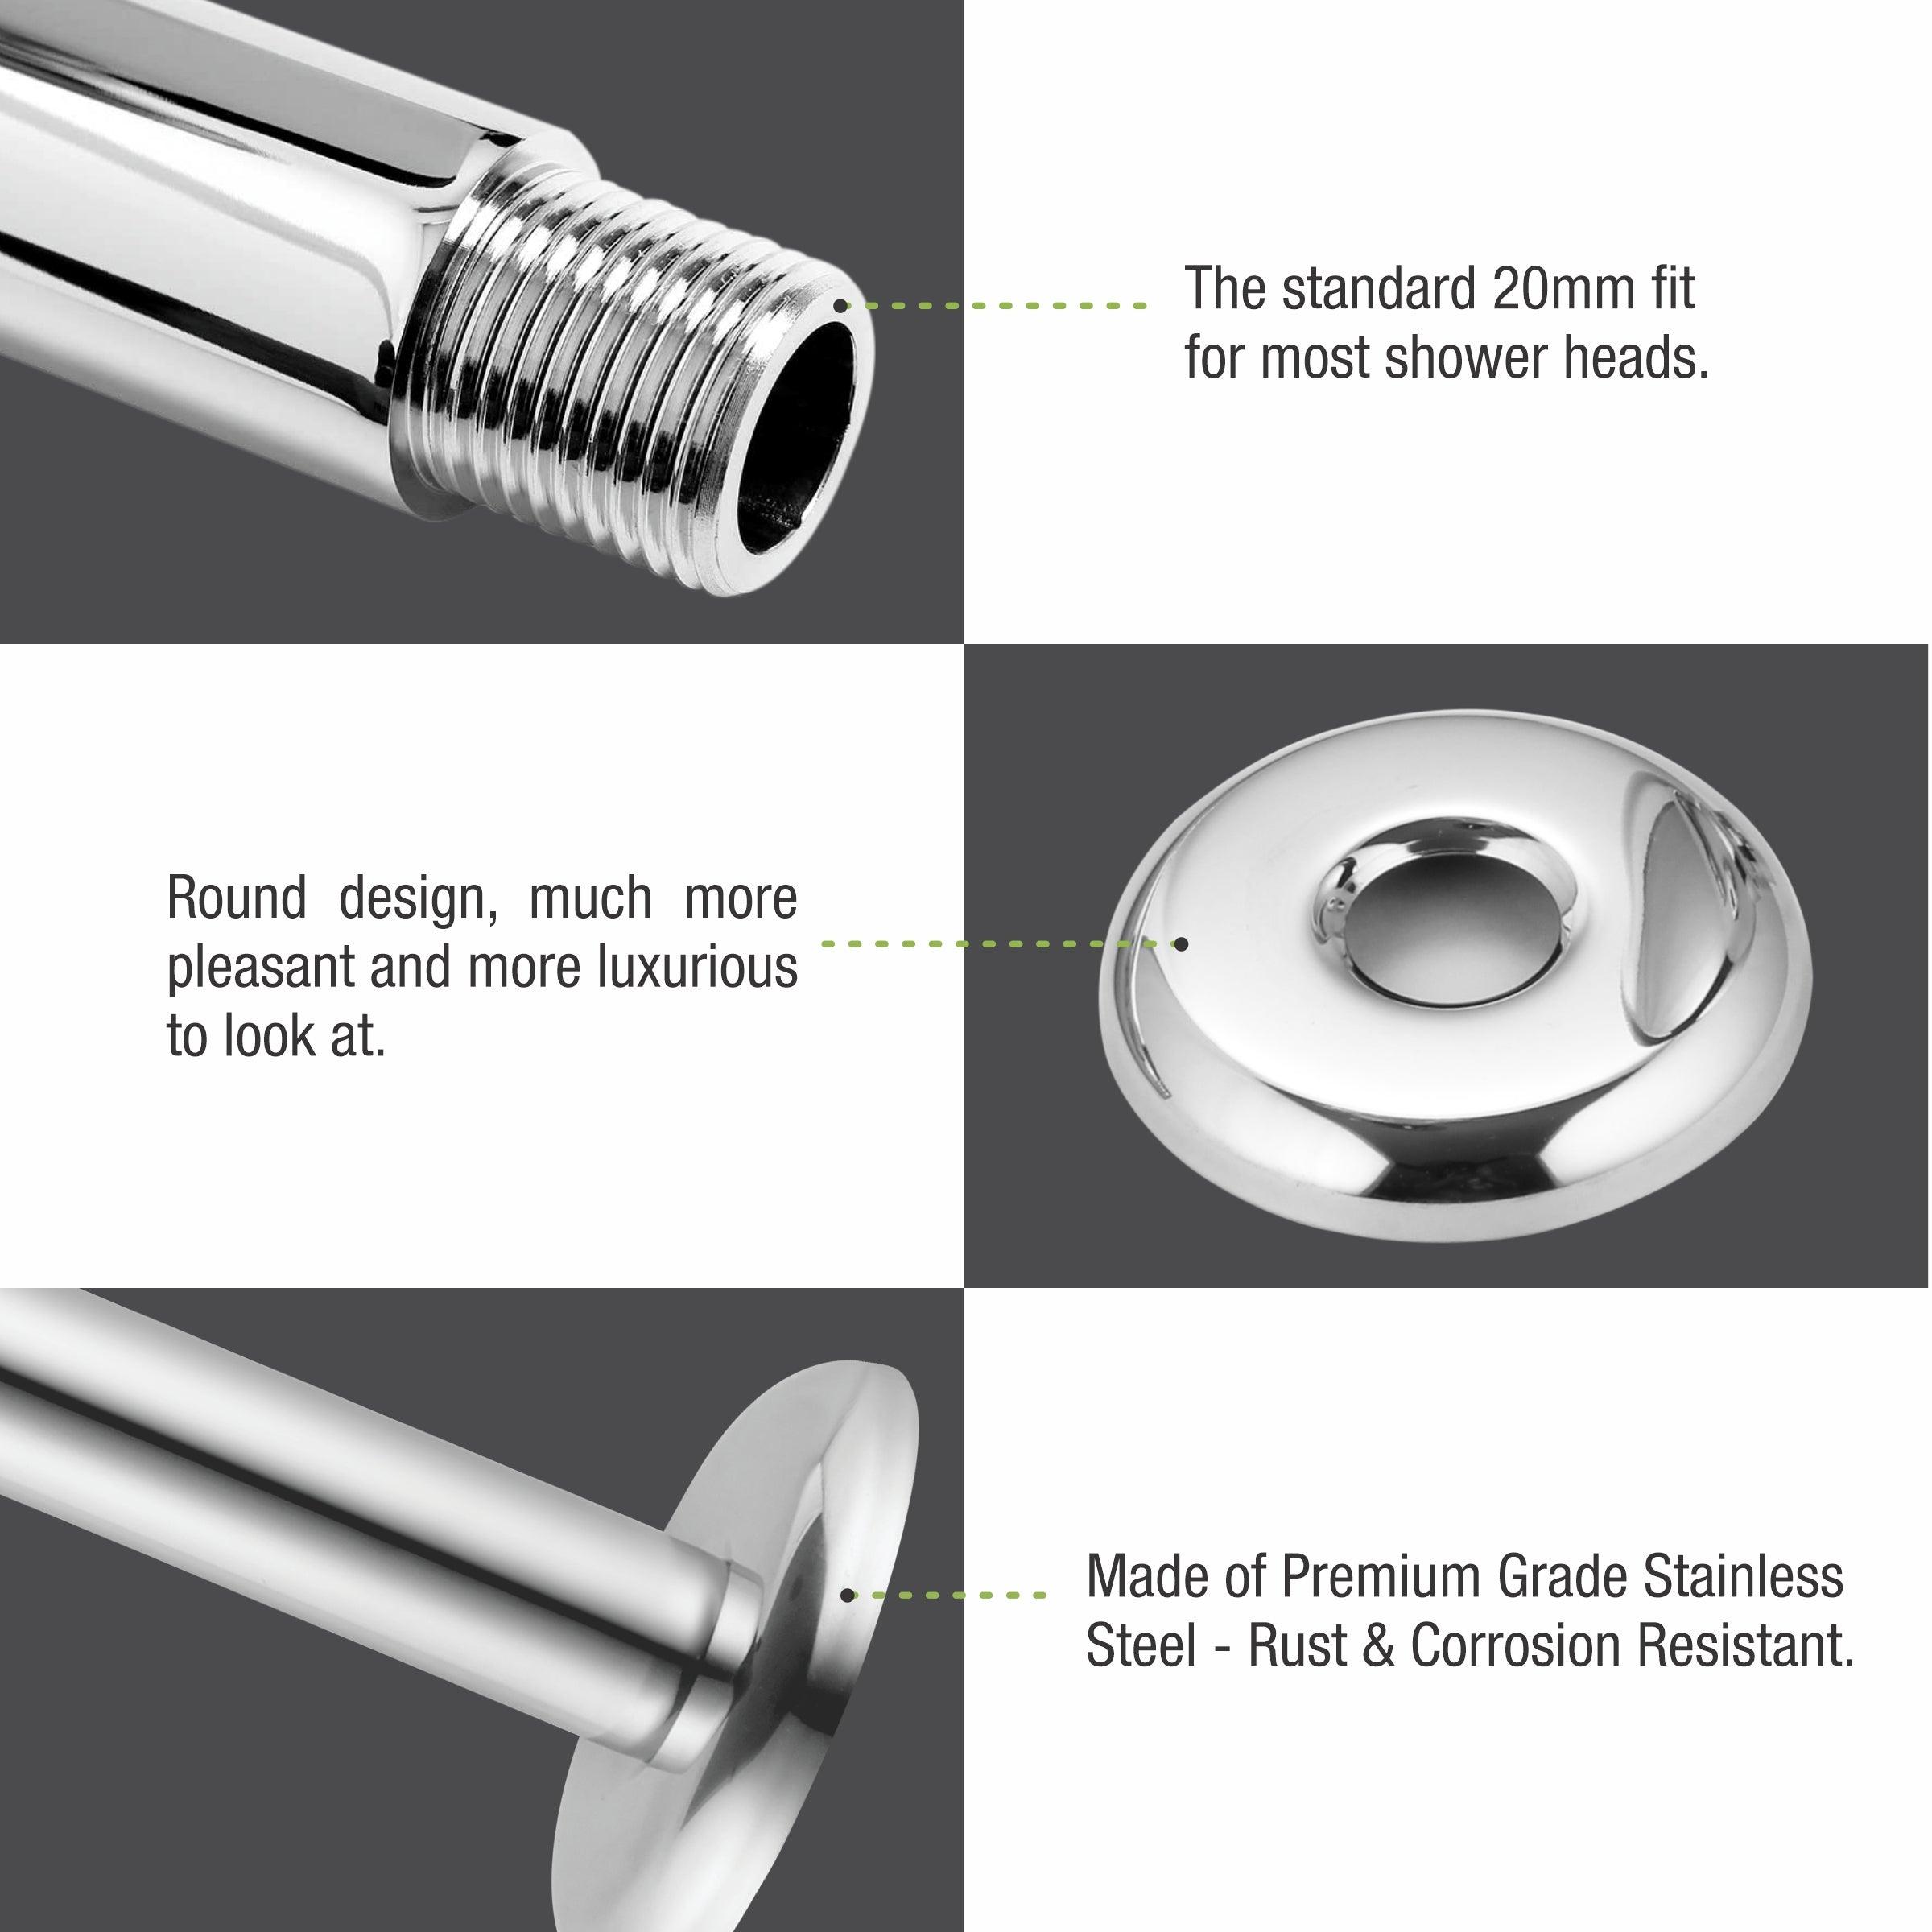 Ceiling Round Shower Arm (8 Inches) features